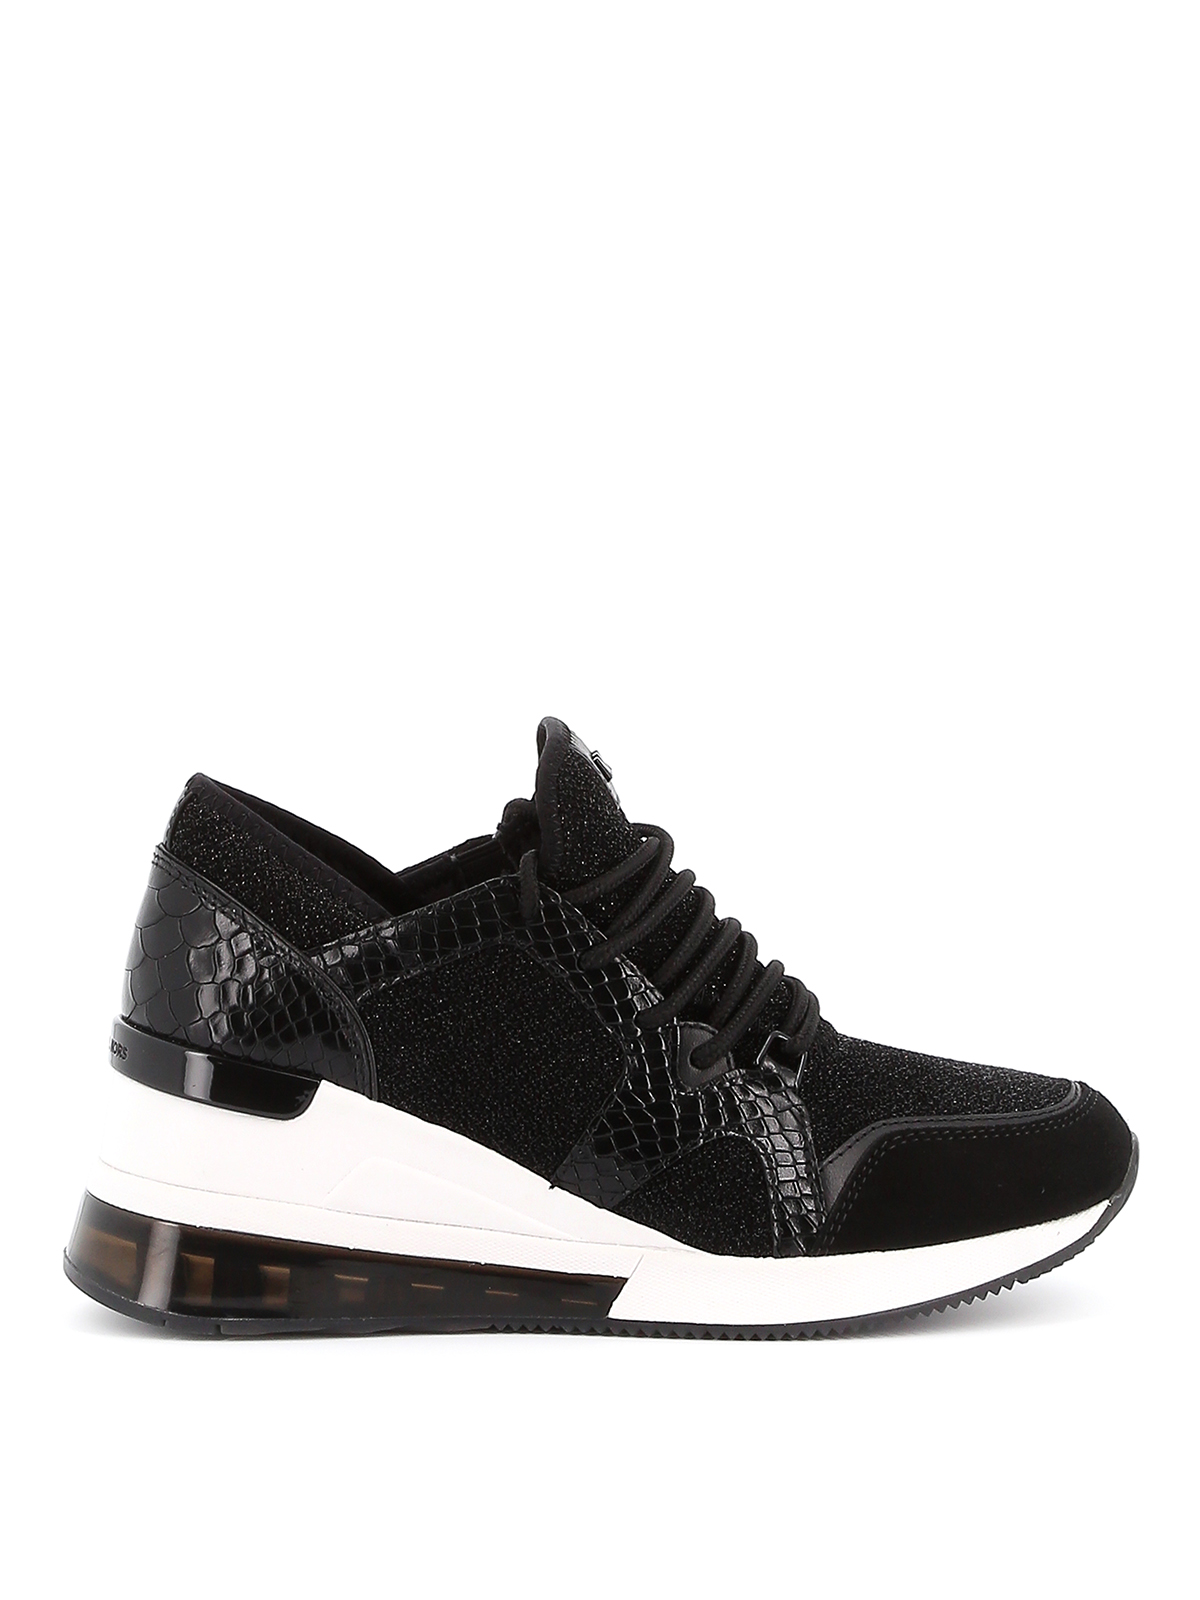 MICHAEL KORS LIV LEATHER AND LUREX TRAINERS